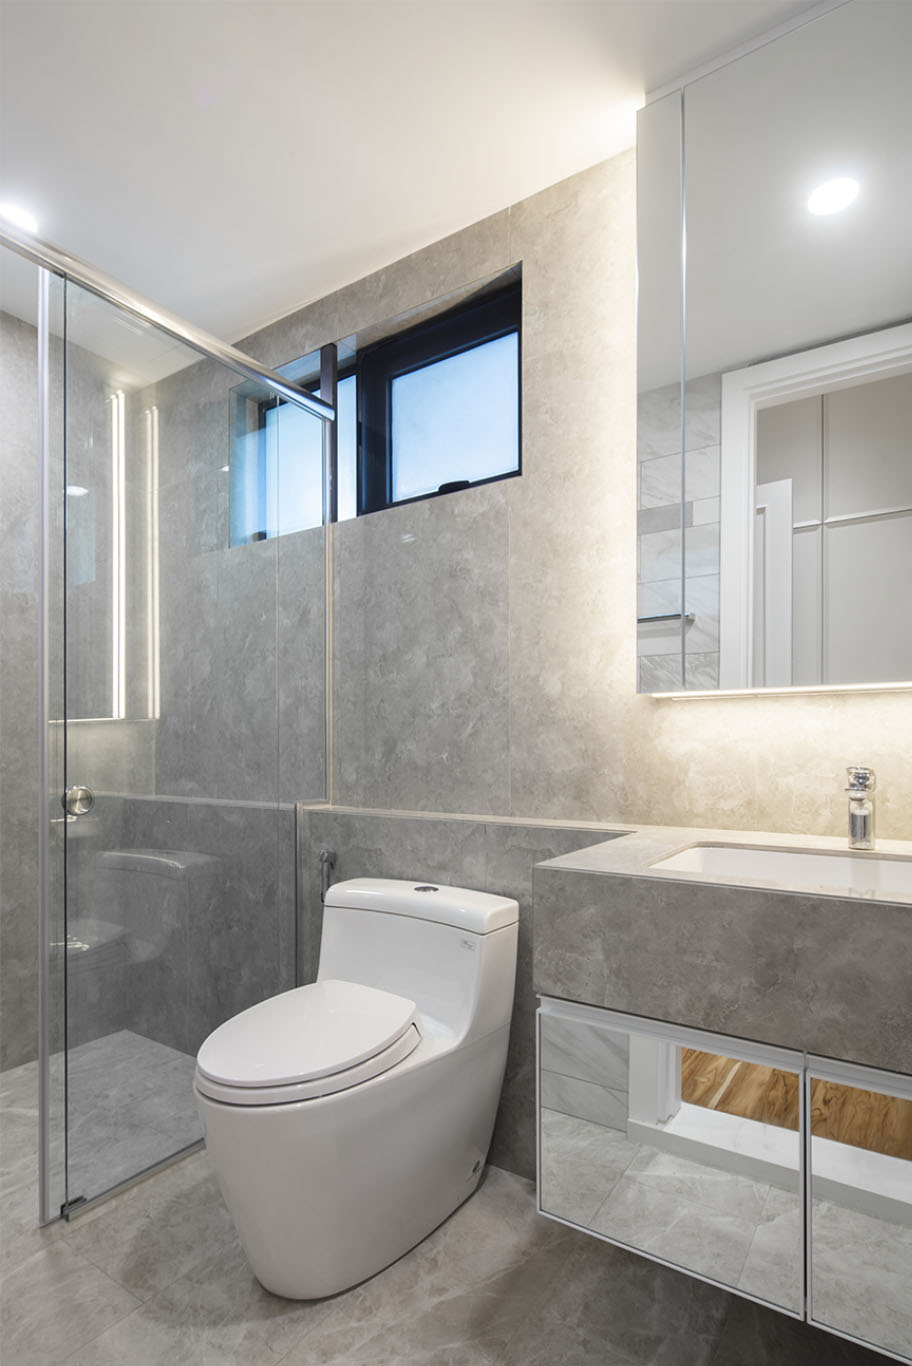 MIEUX The White Royale luxury toilet with grey marble wall and sink with frameless mirror mieux interior design